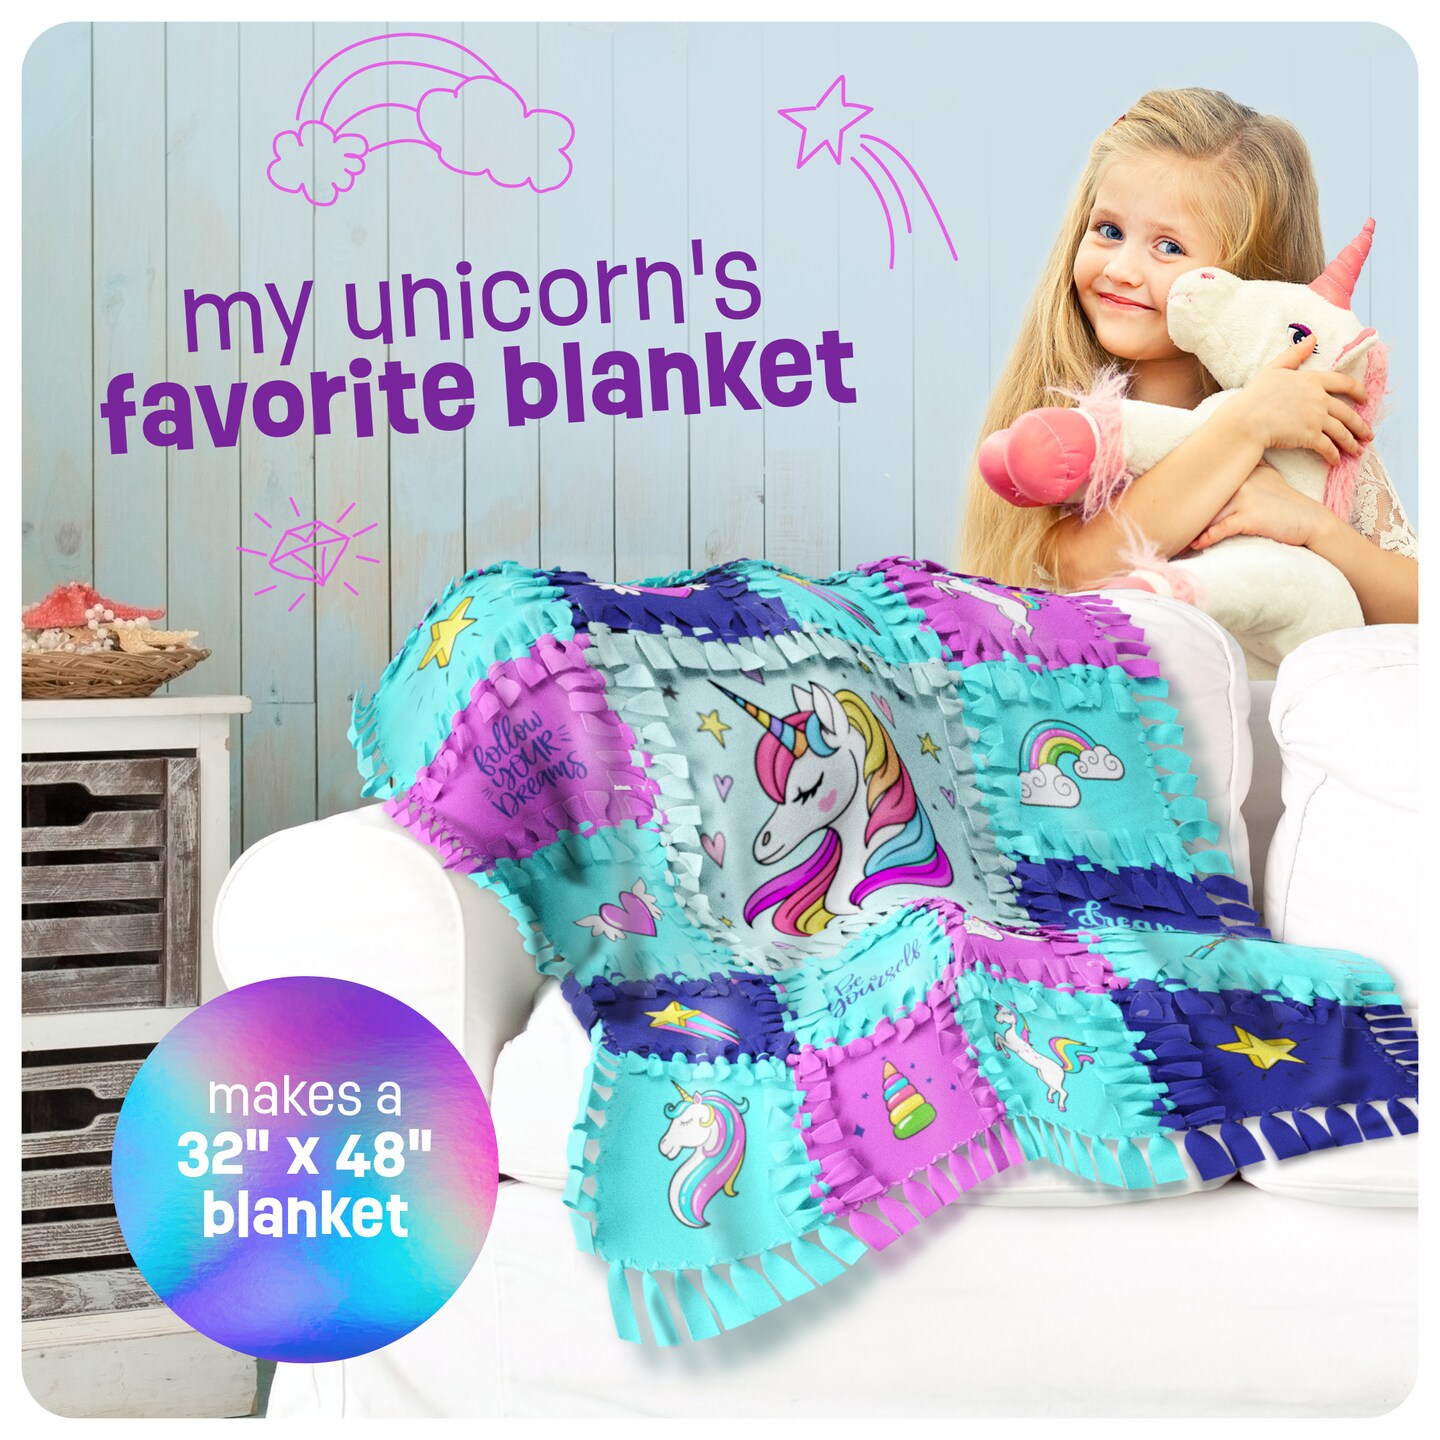 Pretty Me Unicorn Tuck N&#x27; Tie Fleece Blanket Kit - DIY Crafts for for Girls Ages 6+ Year Old - Best Arts &#x26; Craft Girl Gifts Ideas - No Sew Blanket Making Kit - Kids Crafts Gift Toys Kits